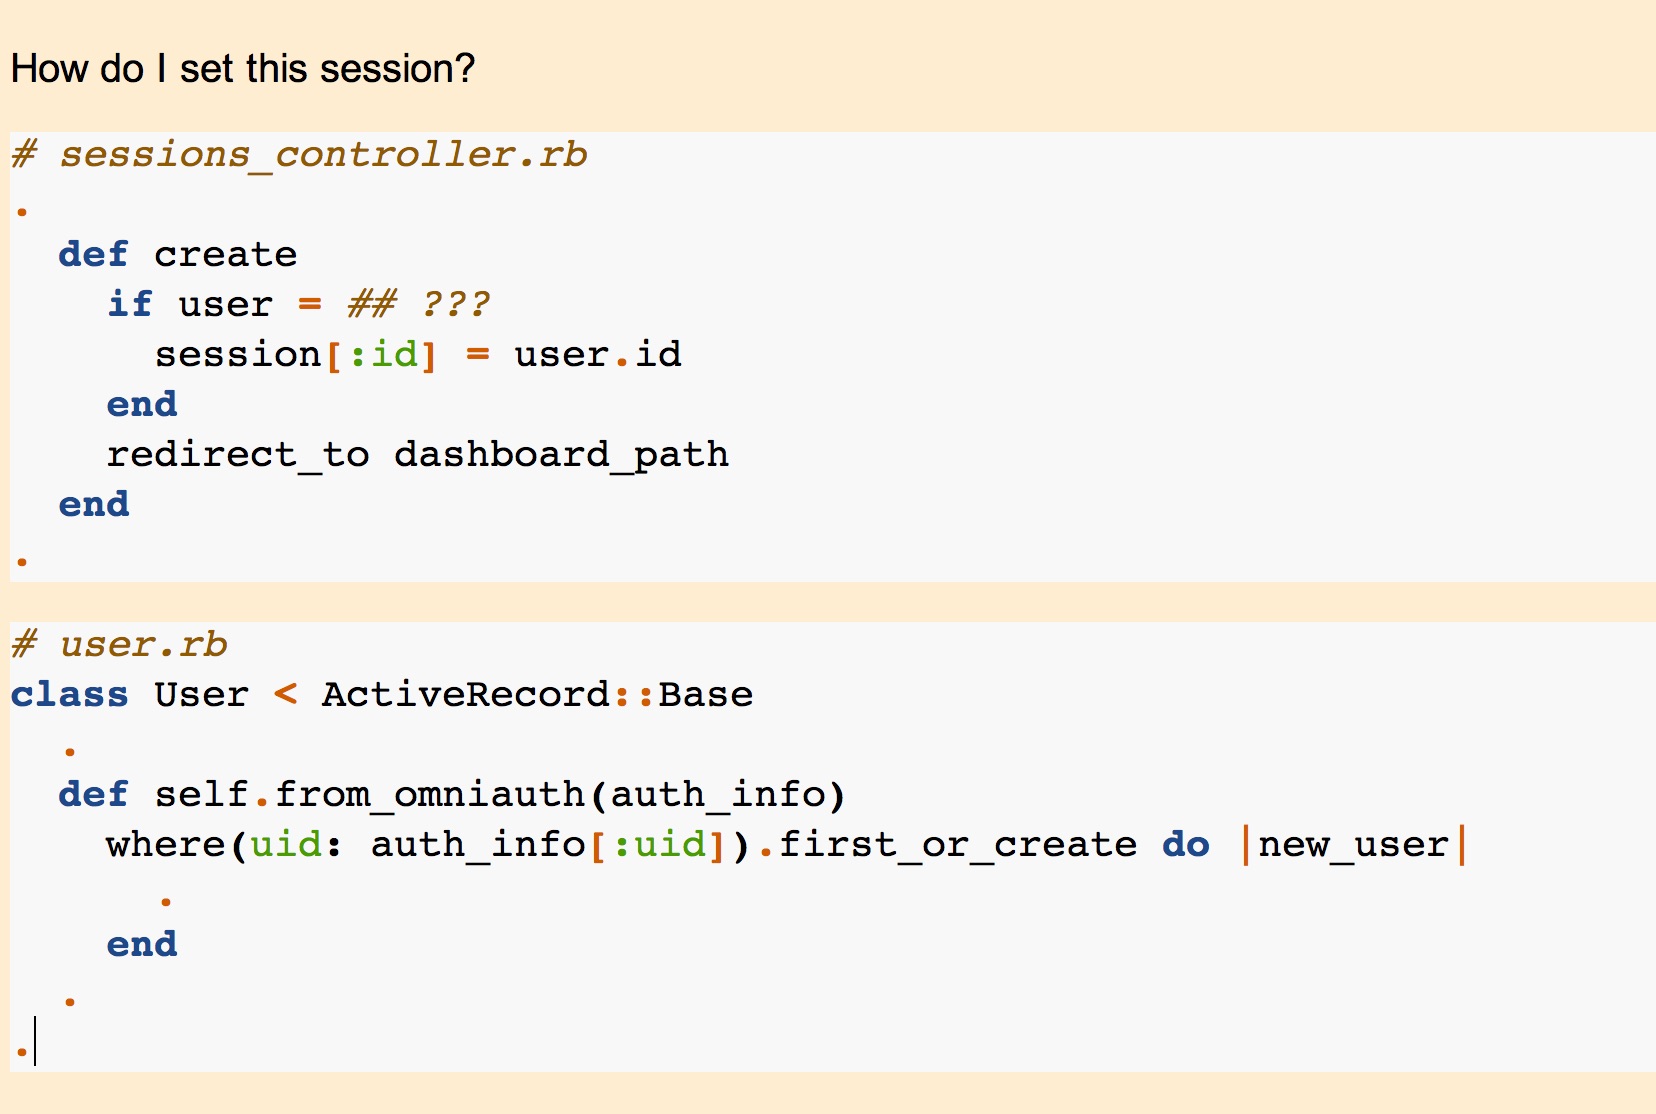 Anki card for using OmniAuth to manage user session